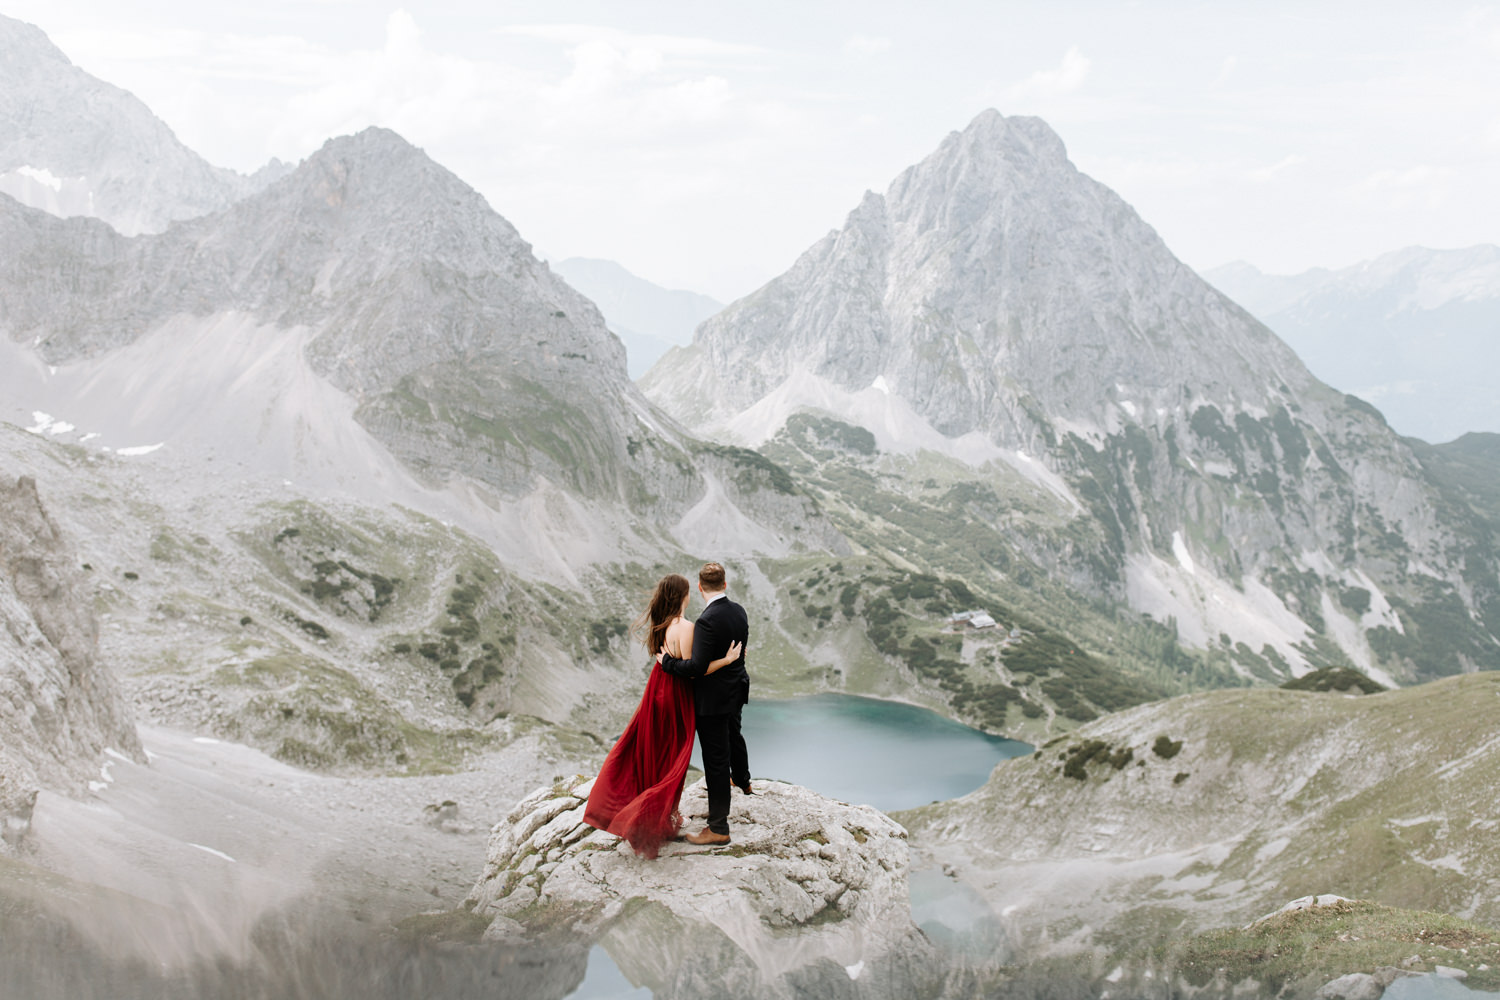 A couple hiking on their elopement day stand near the Austrian Zugspitze, a dramatic grey mountain scape in front of them and deep blue lakes. She is wearing a red flowing dress and him a dark suit.